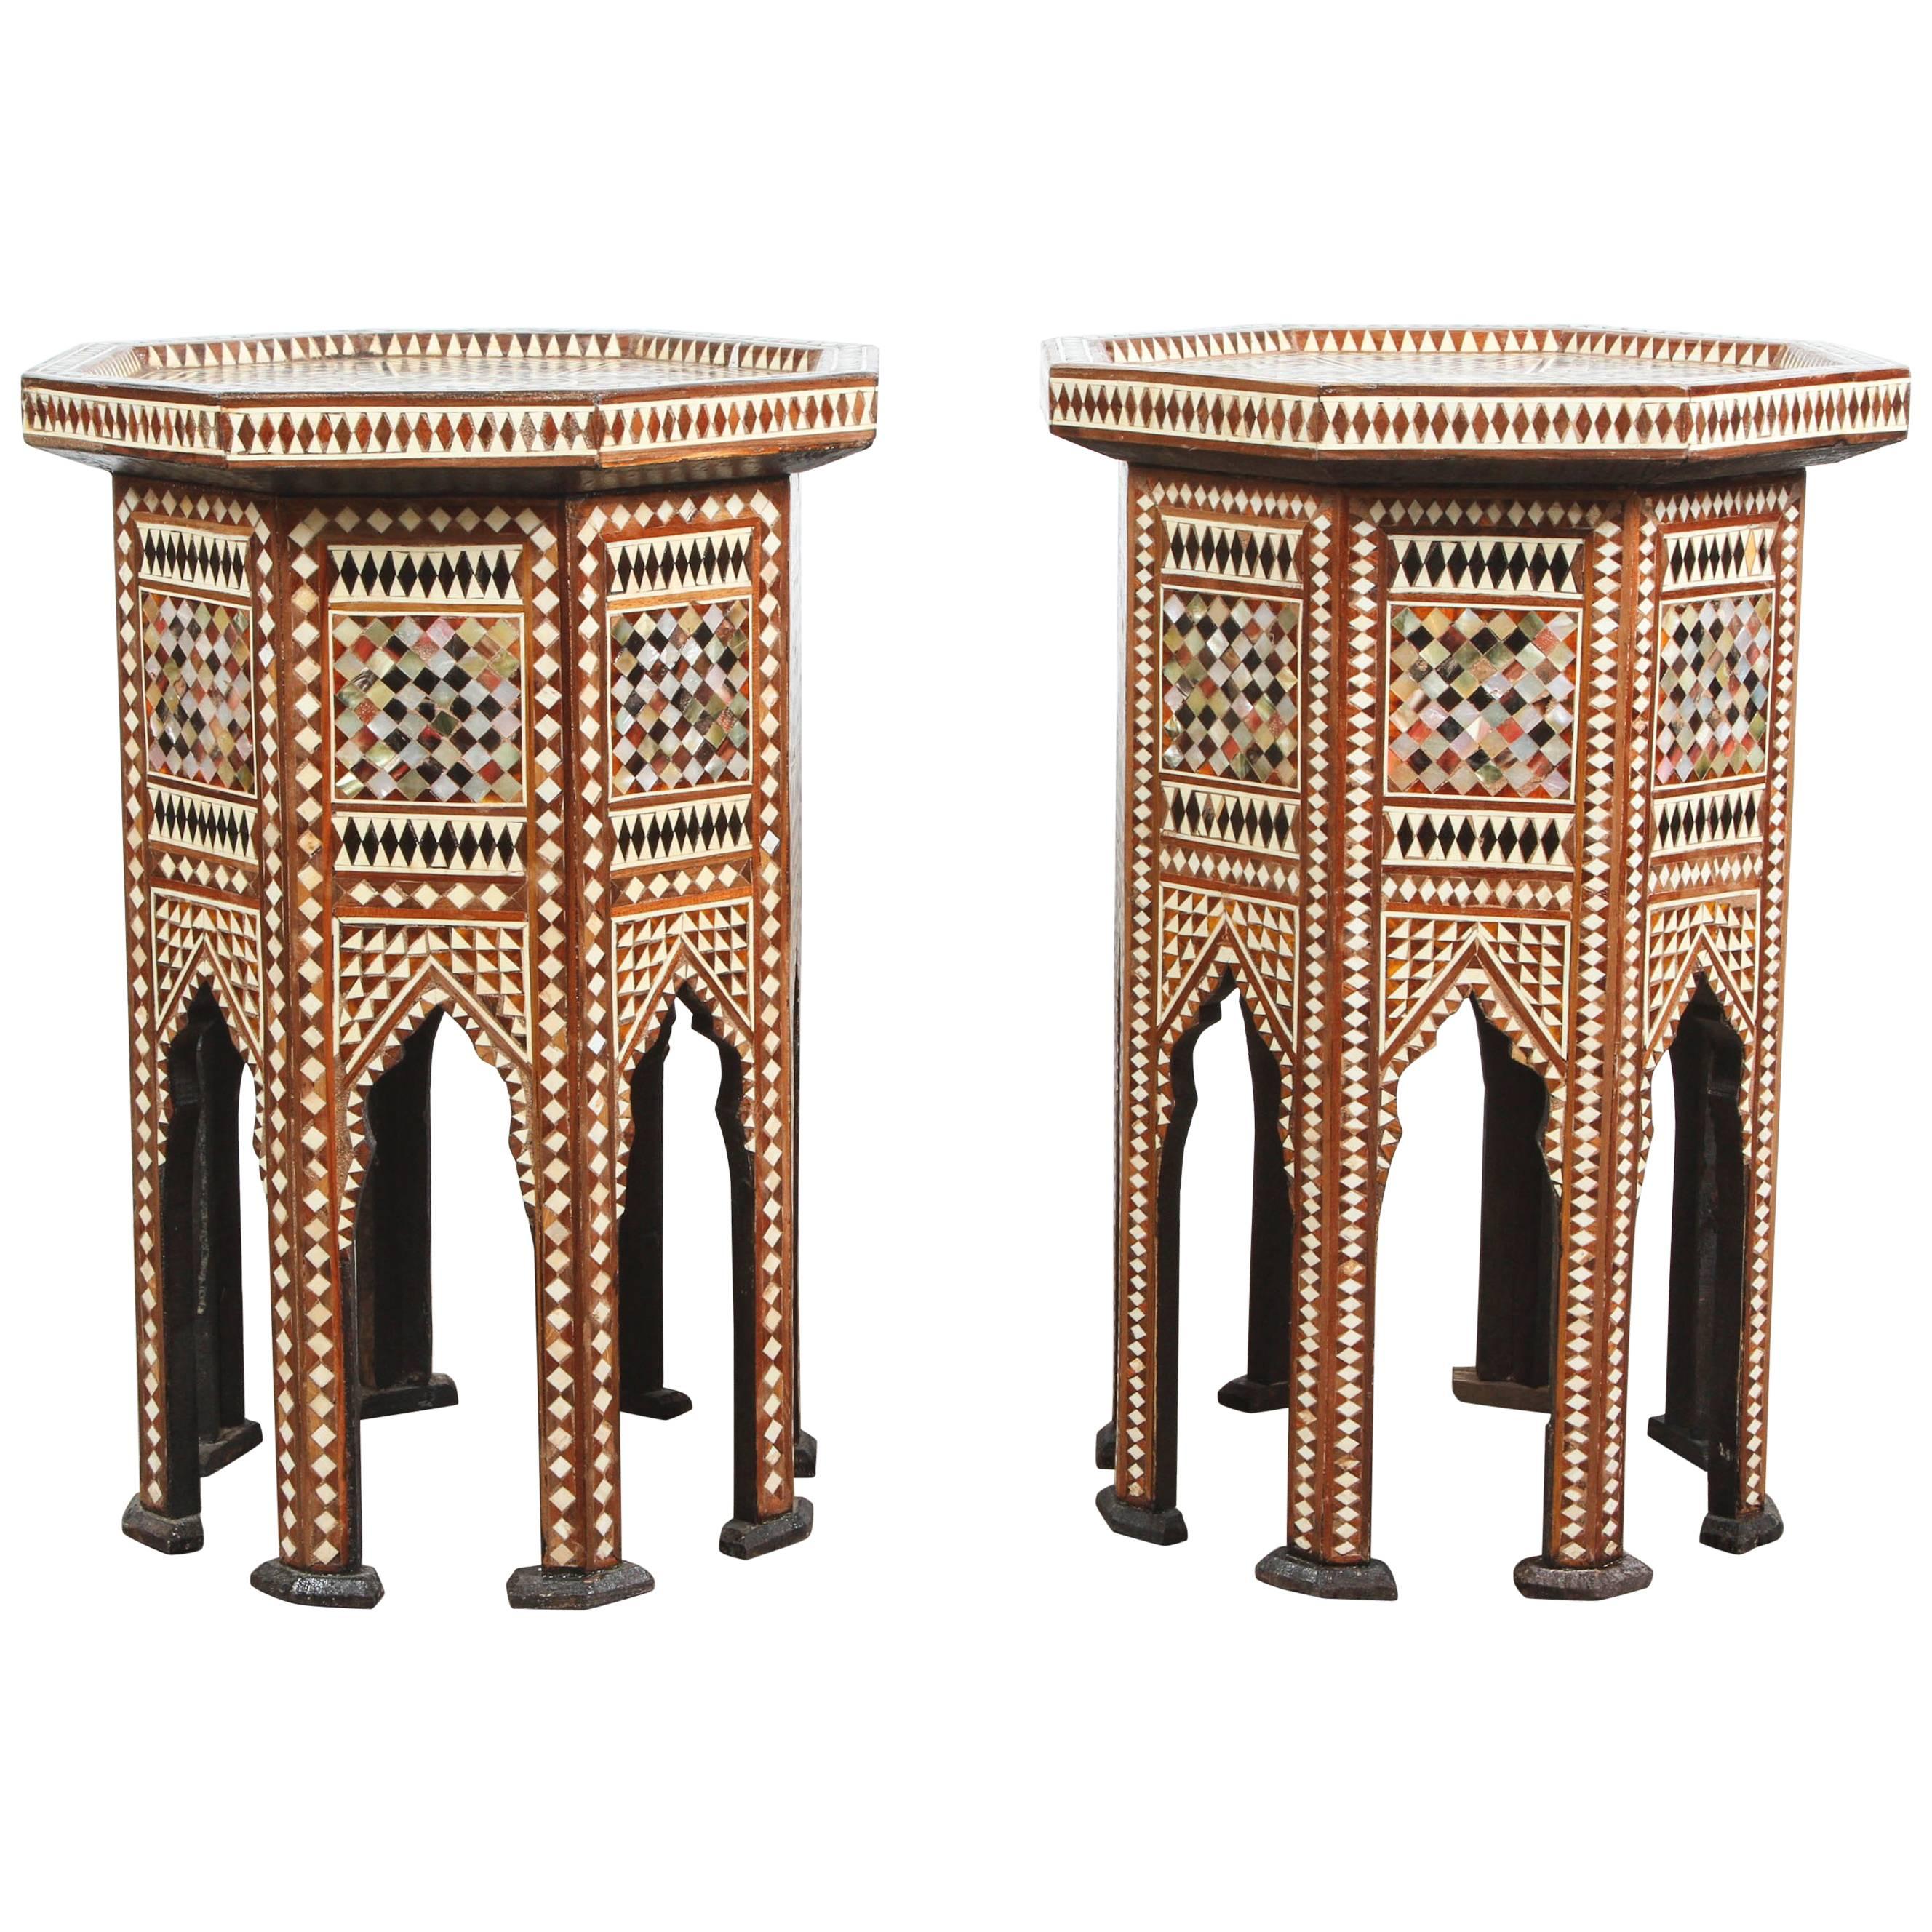 Pair of Moorish octagonal walnut side tables inlaid with mother of pearl, horn, ebony and camel bone.
Moorish arches on the eight sides,
Great addition for a Moroccan room project.
Very intricate inlay Middle Eastern Moorish ottoman artwork.